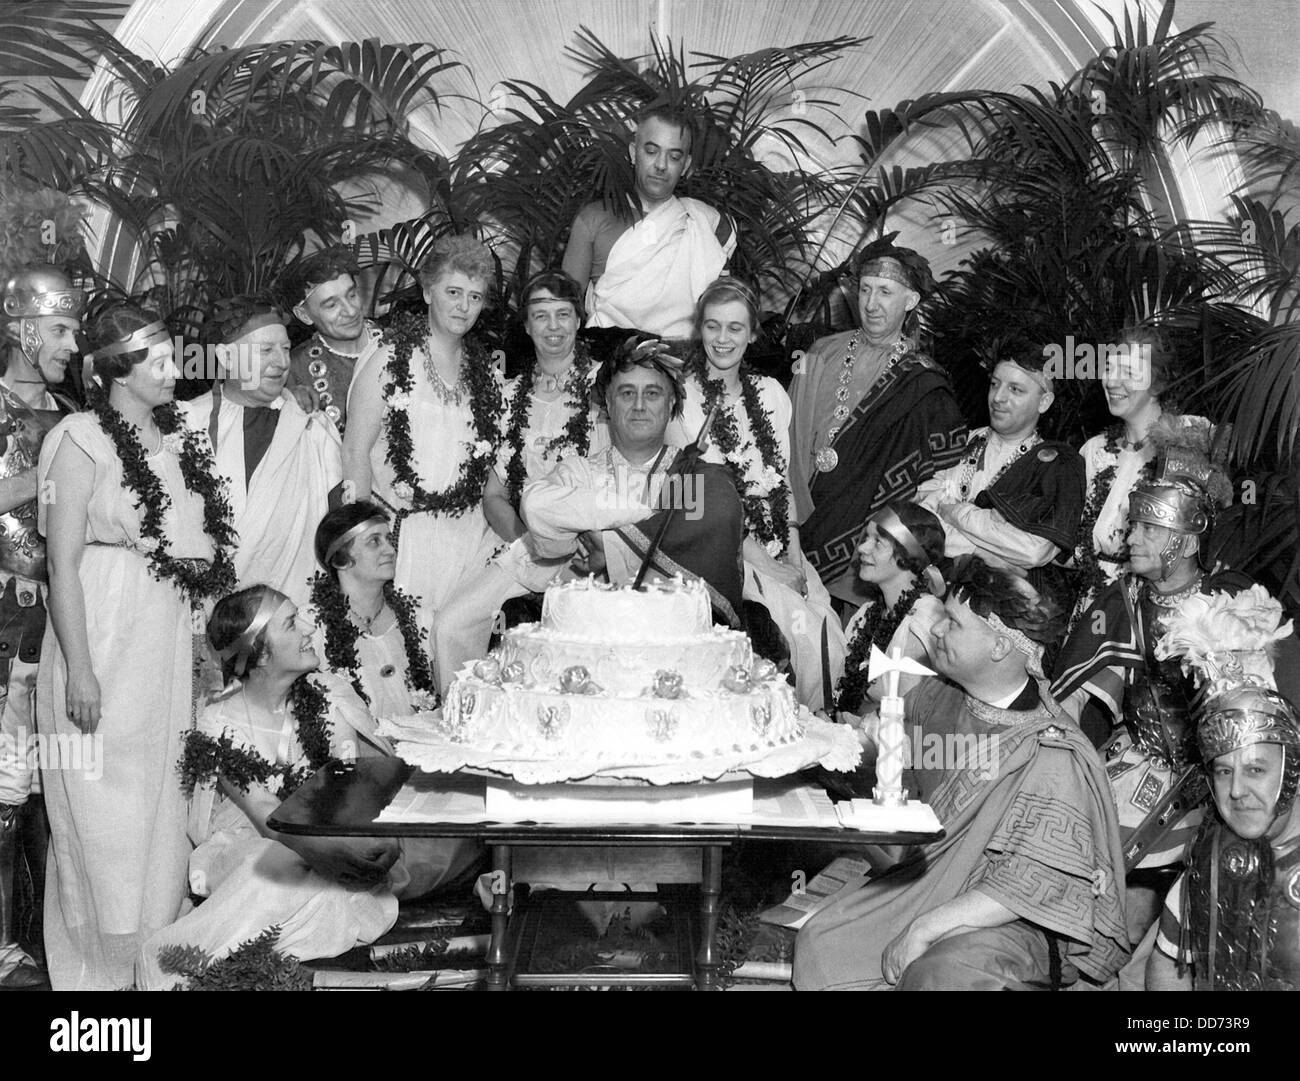 FDR celebrating his 52nd birthday at a toga party. Jan. 30, 1934. With the President are Marvin McIntyre, Grace Tully, Tom Stock Photo